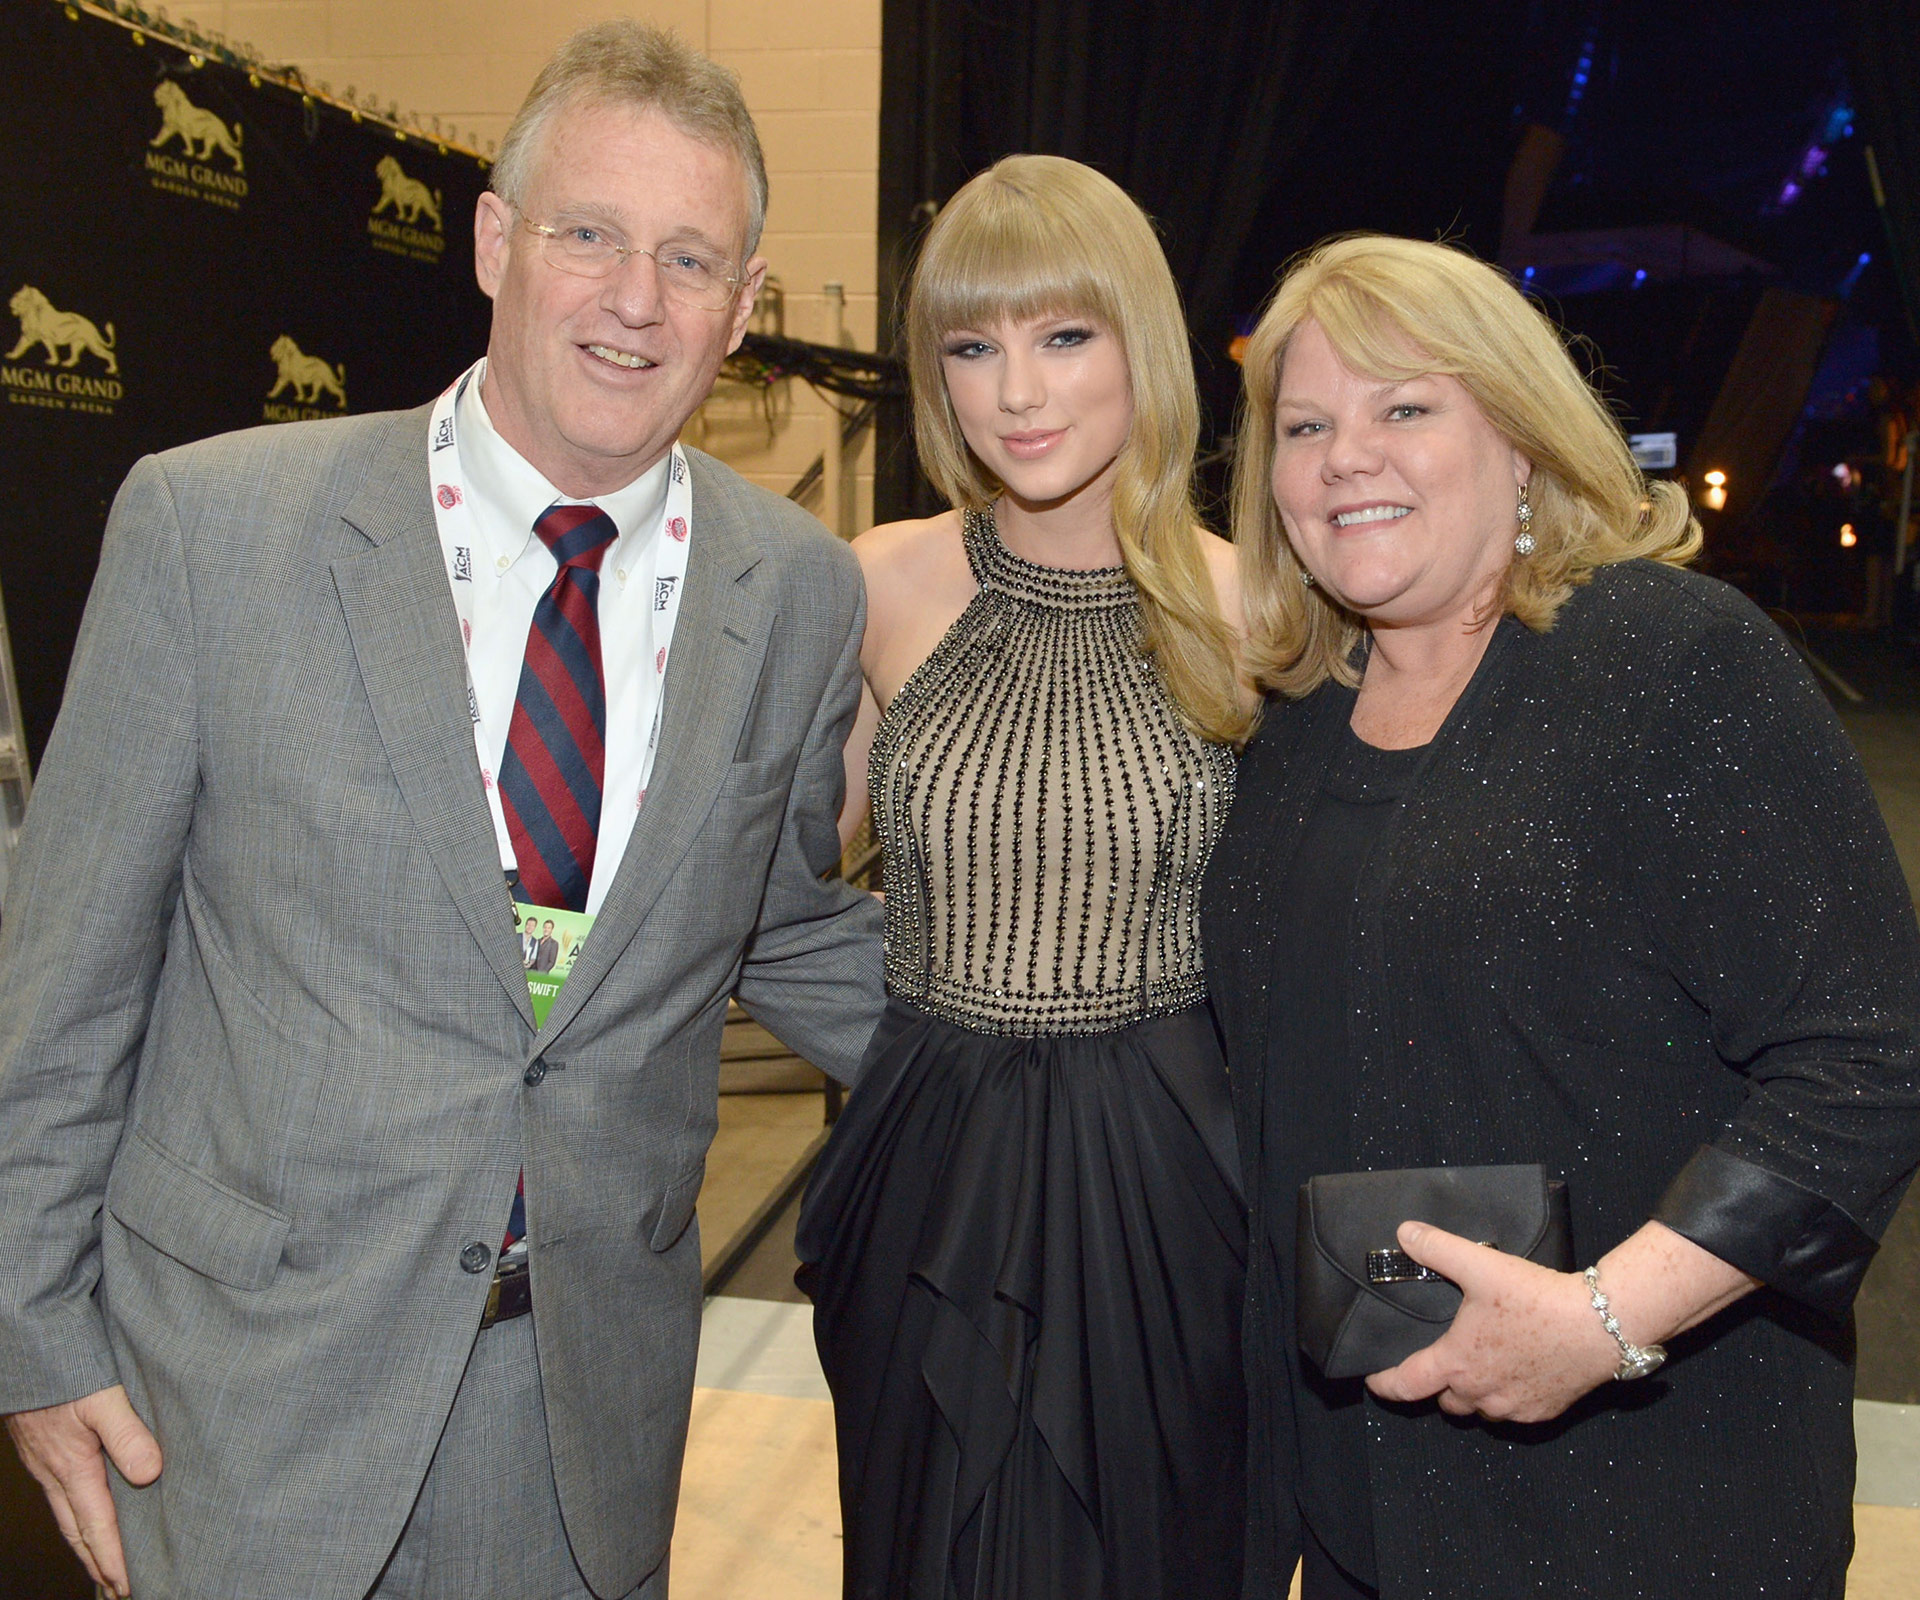 Taylor Swift reveals that her mum Andrea Finlay has cancer